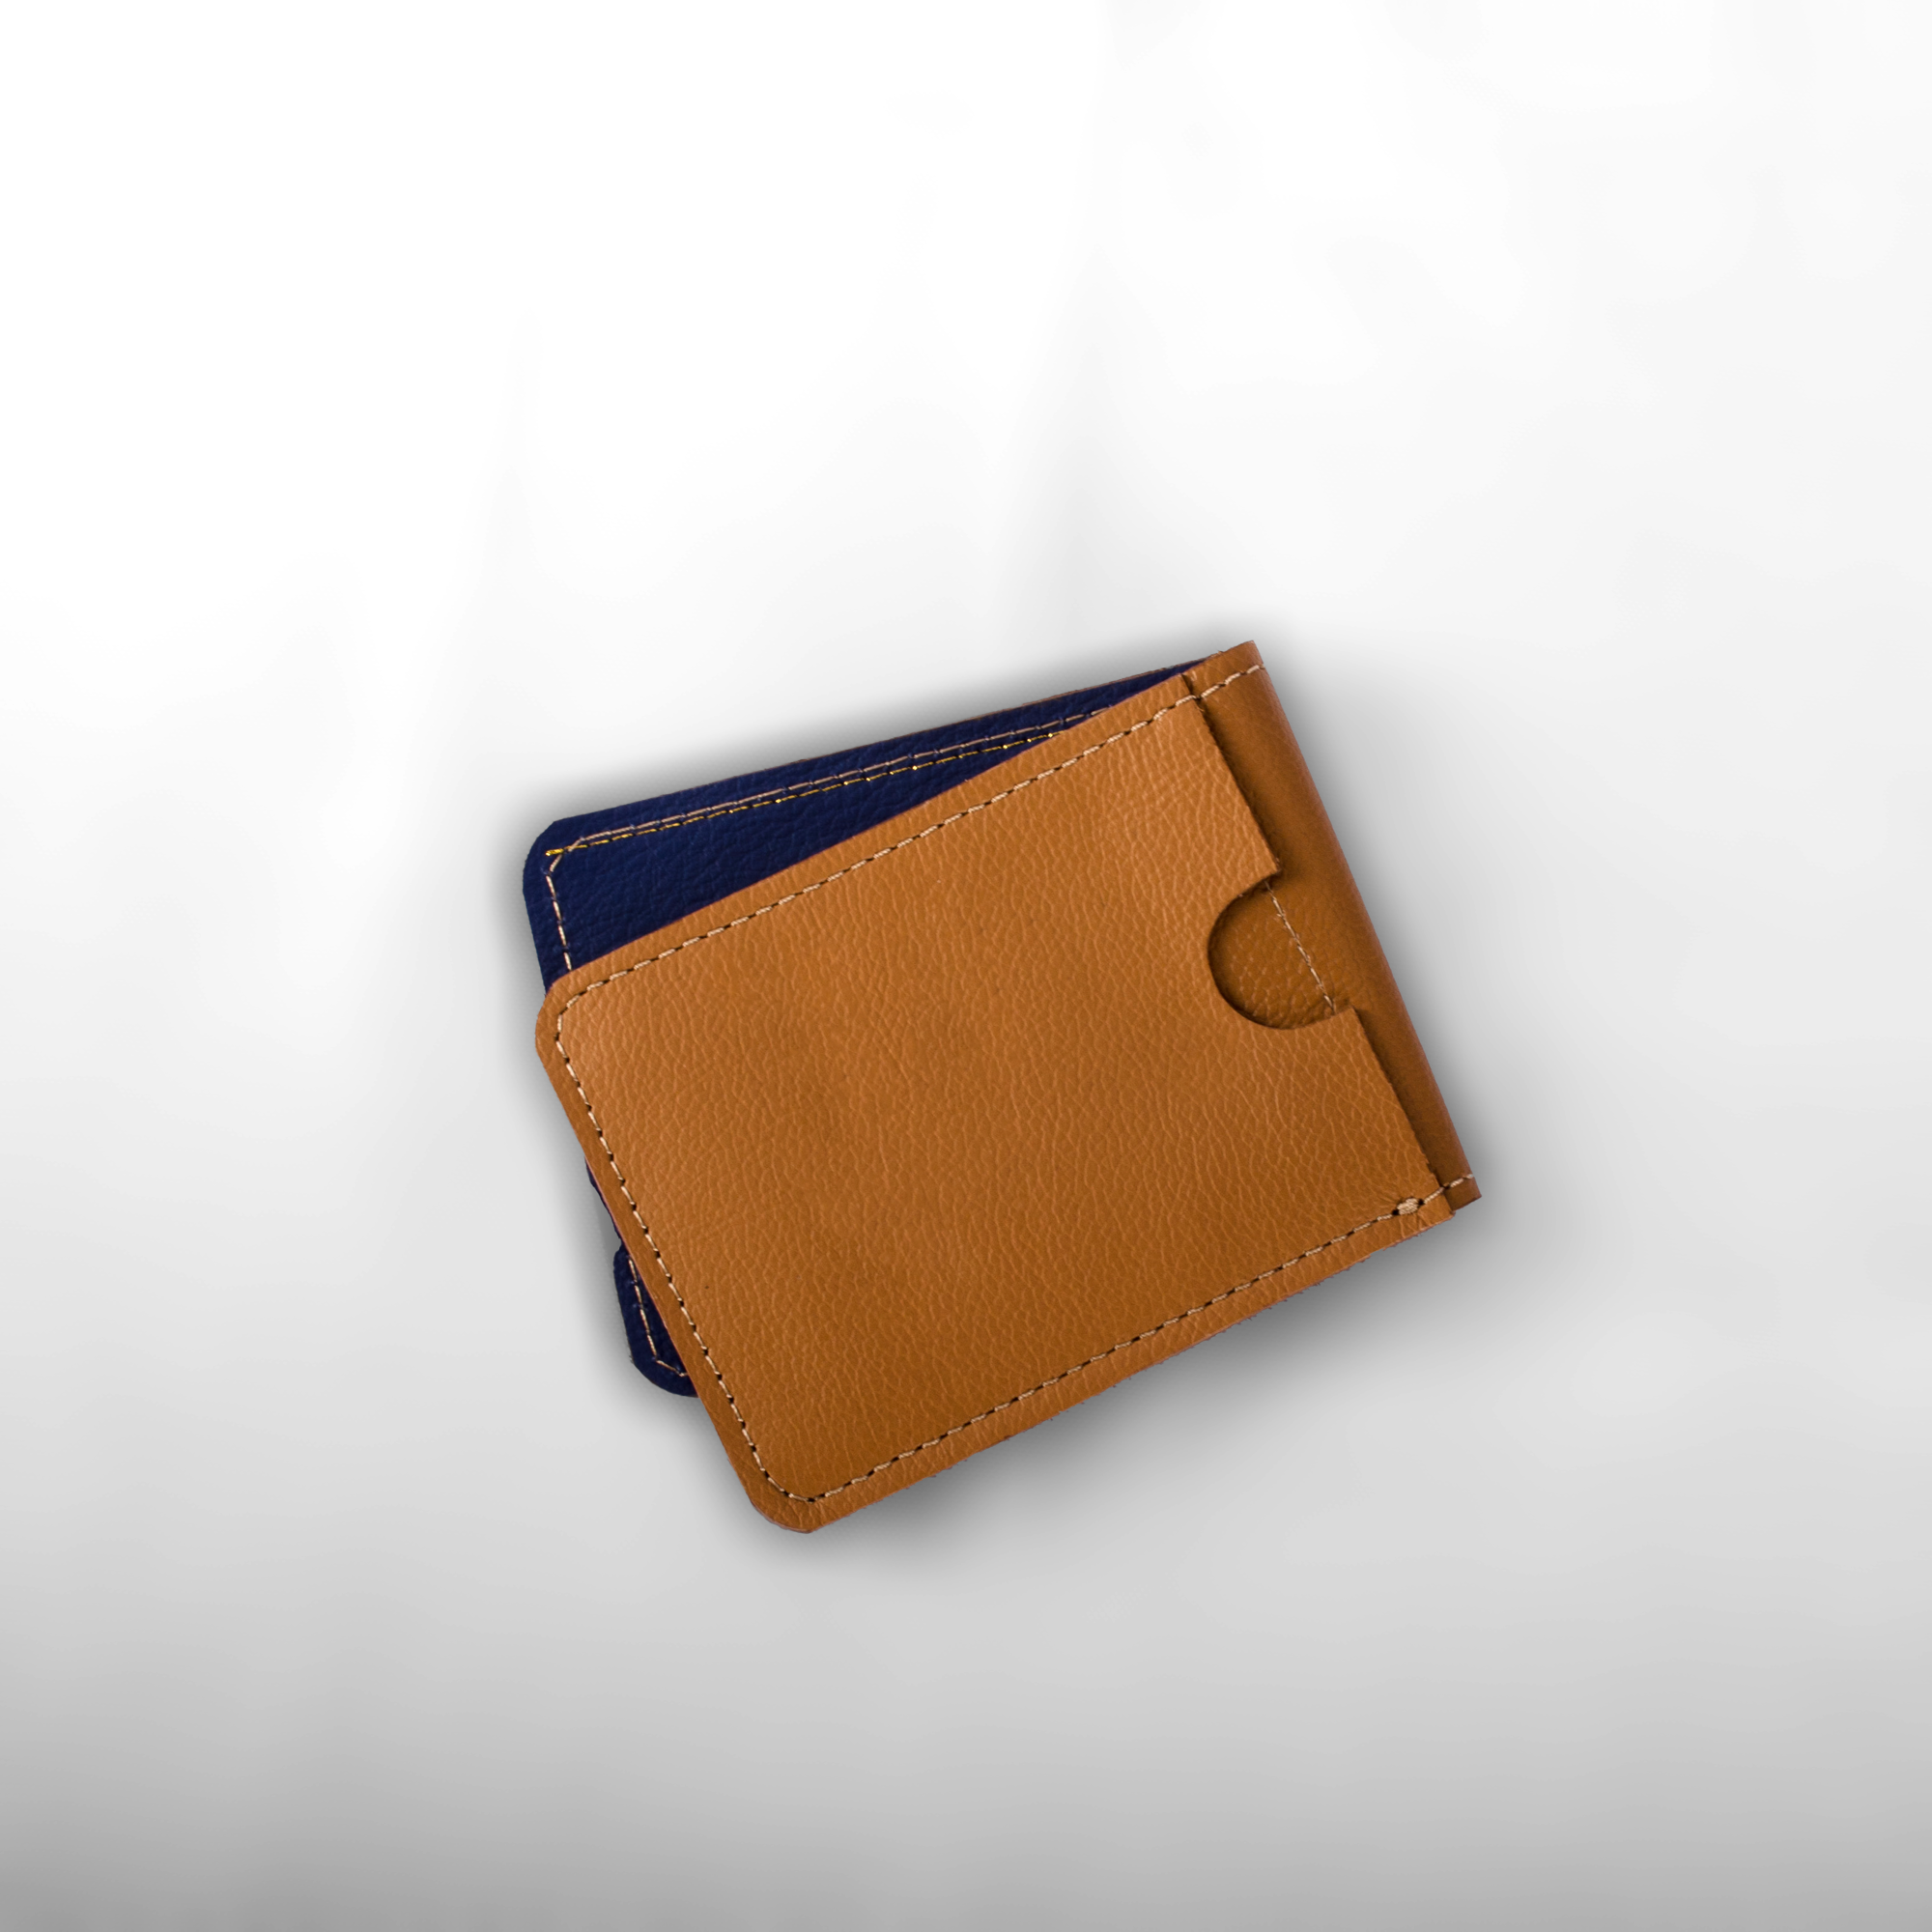 Wallet from Southwest Airlines Leather